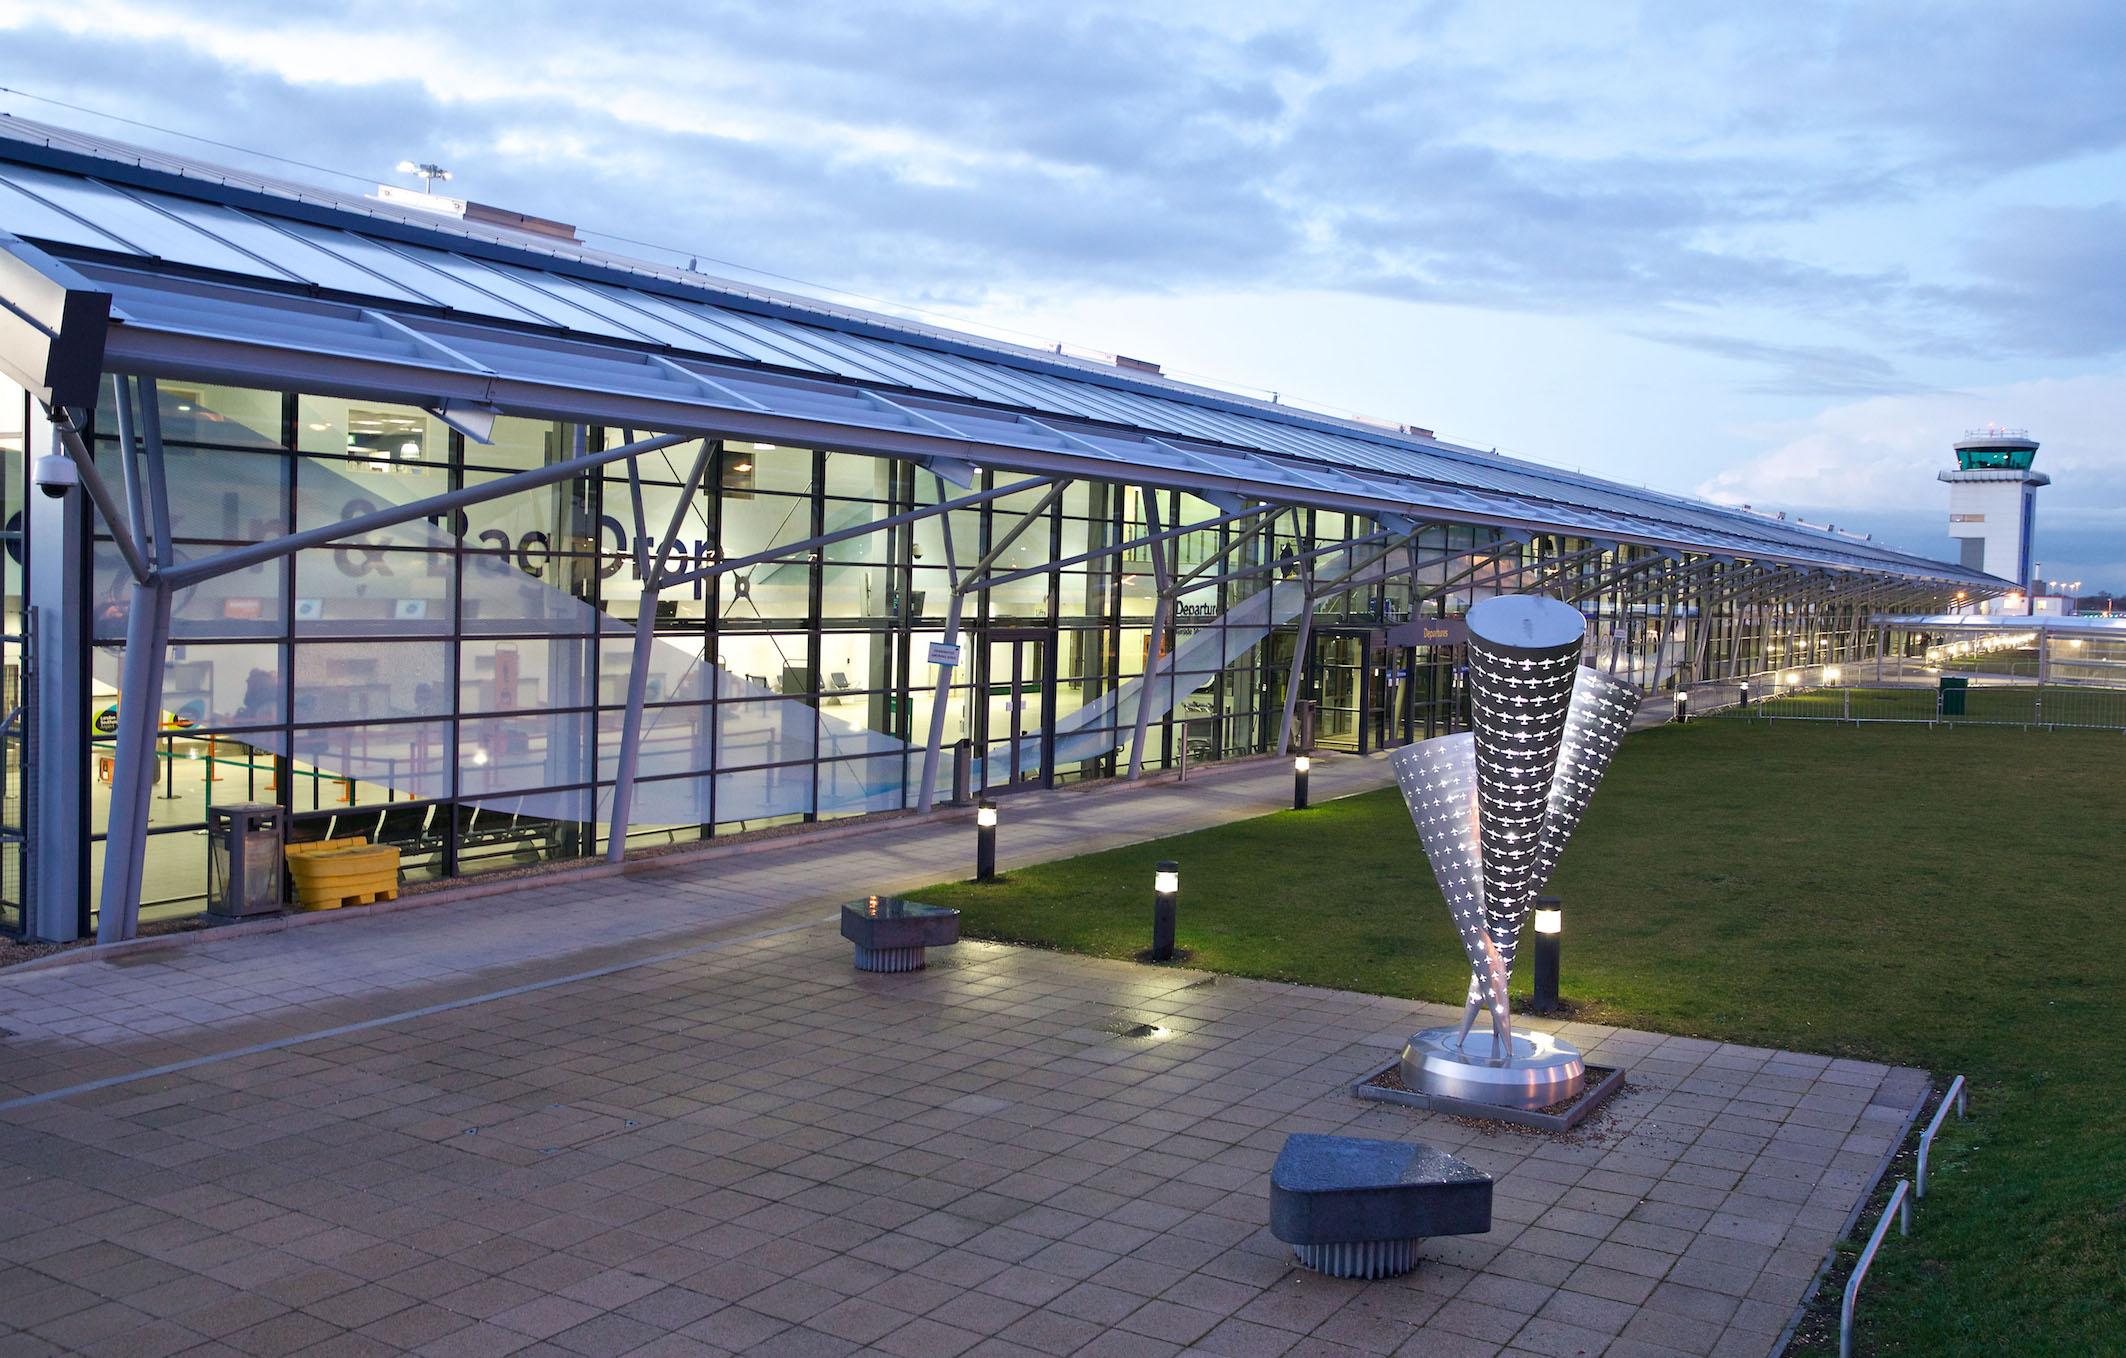 London southend airport